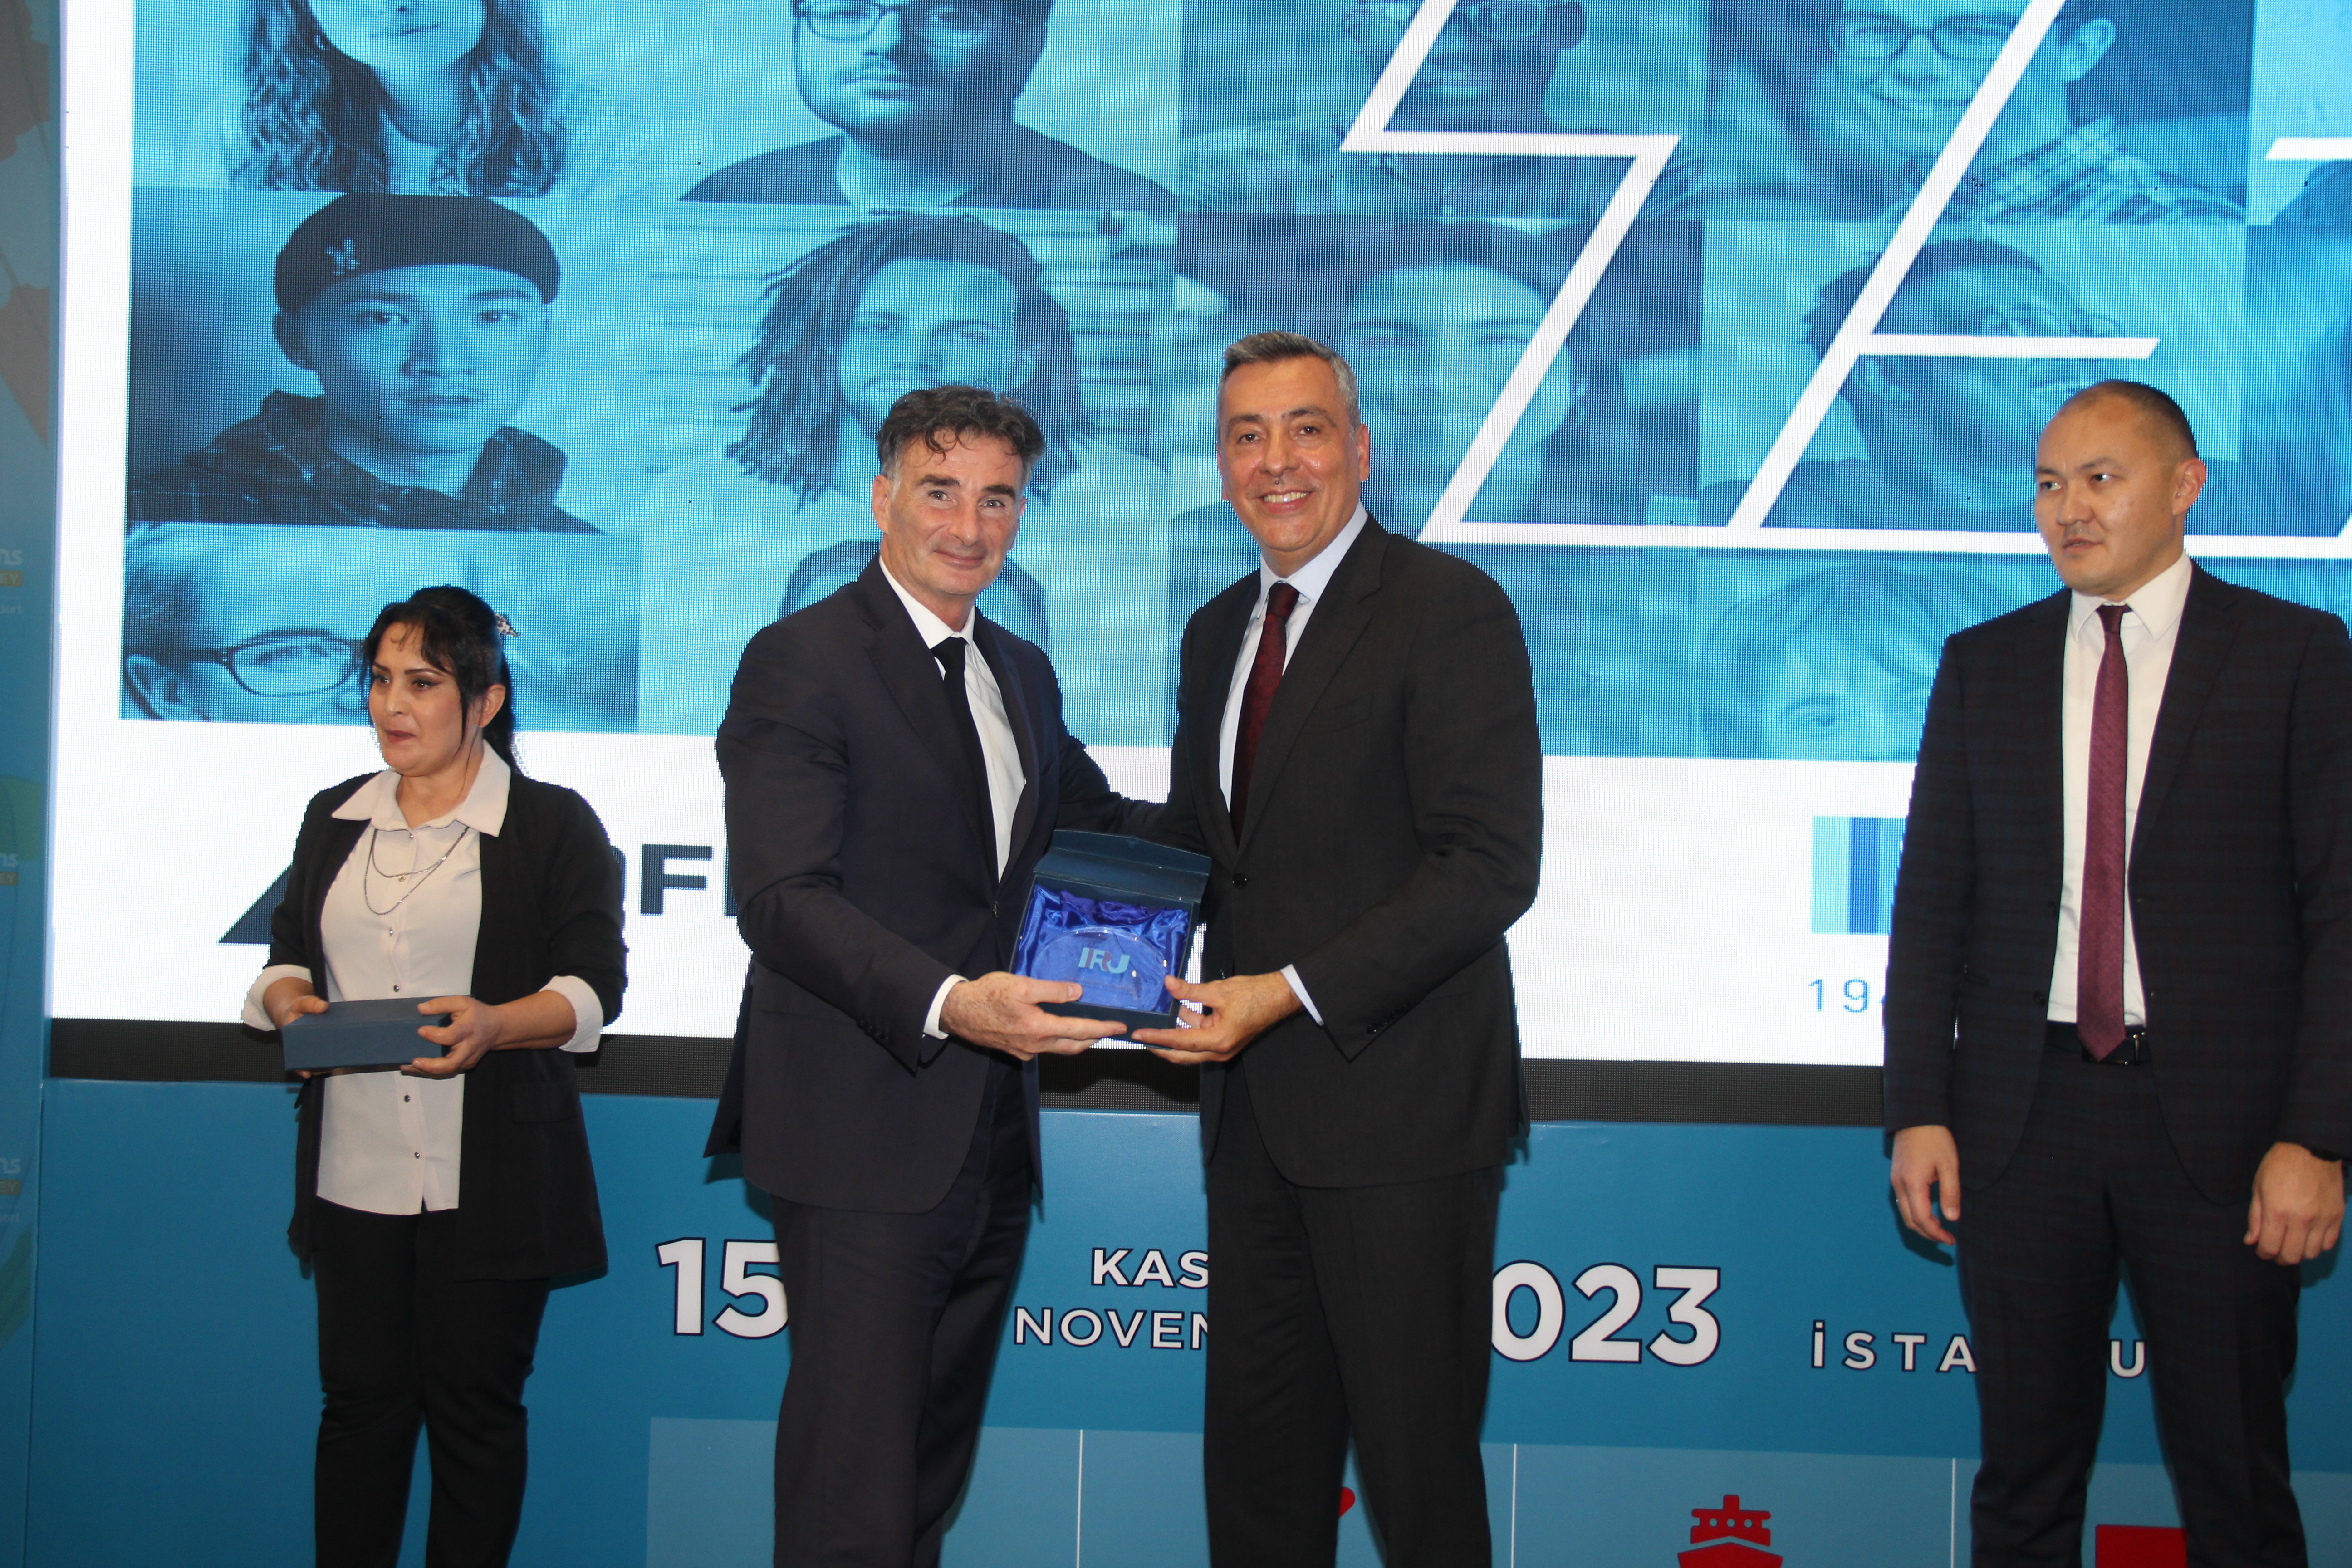 The road to the future: IRU marks 75th anniversary in Istanbul